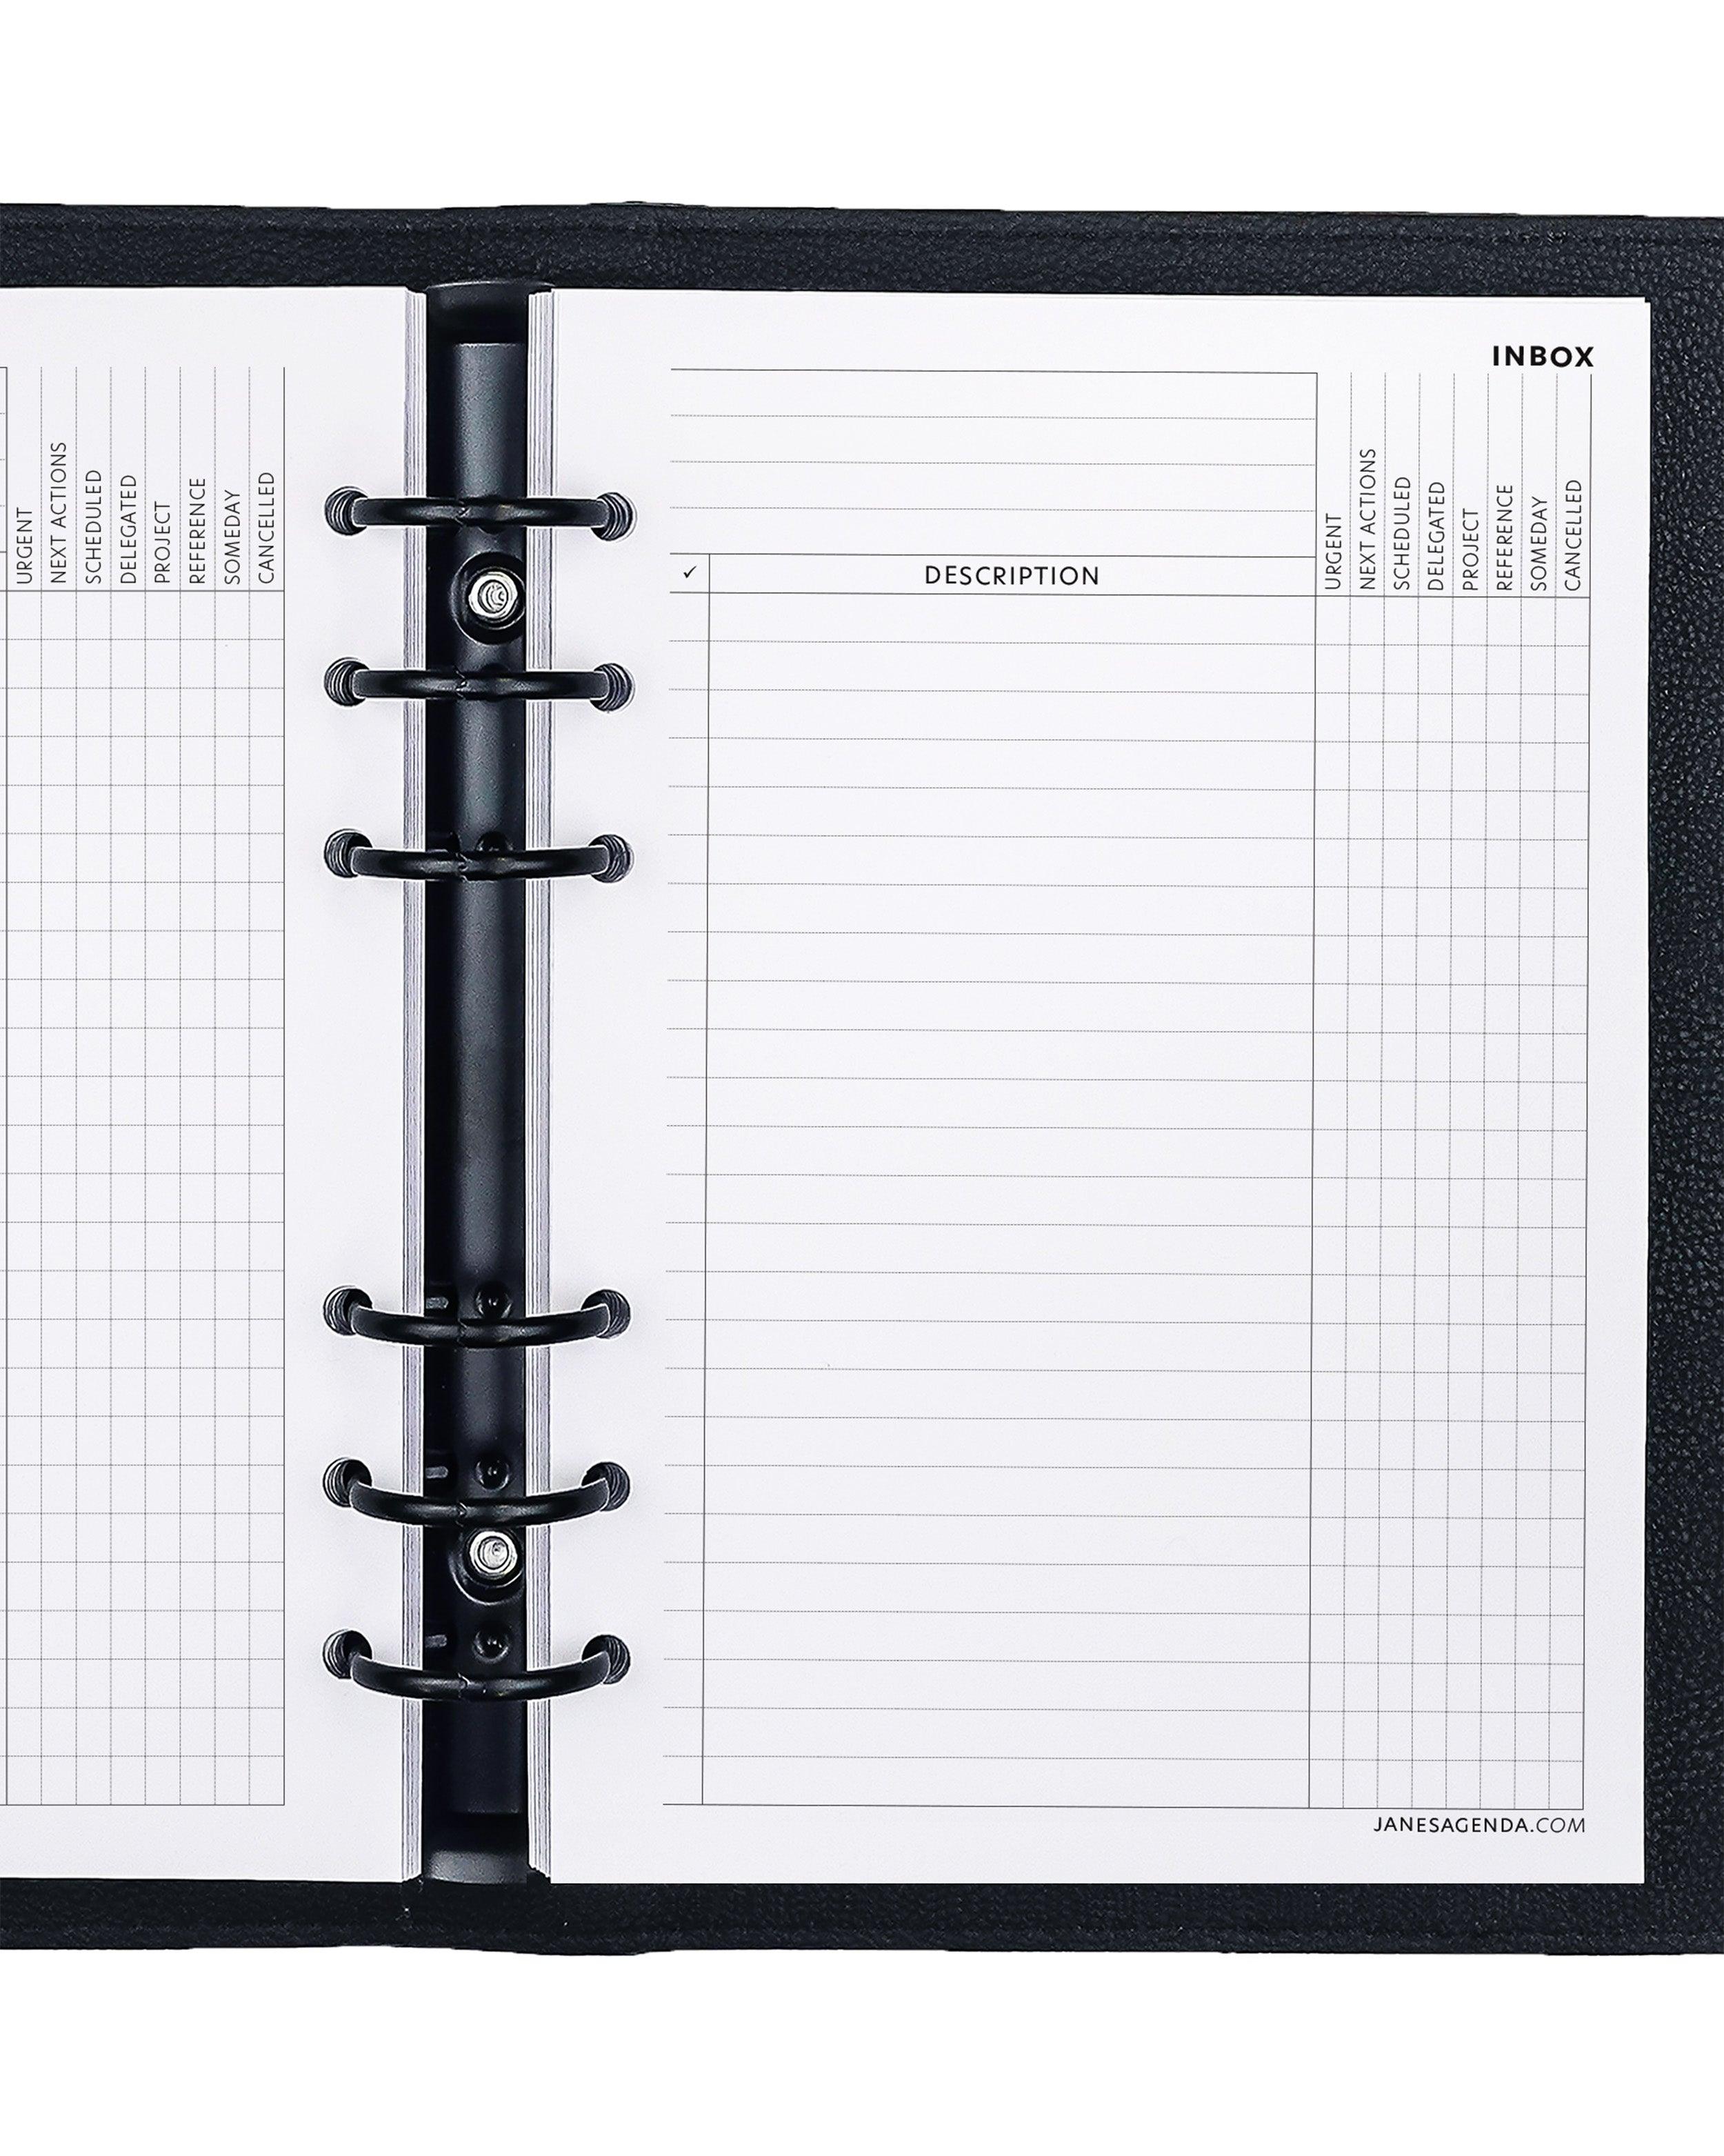 Inbox planner insert refill pages for discbound and ringbound planners and planner notebooks by Jane's Agenda.